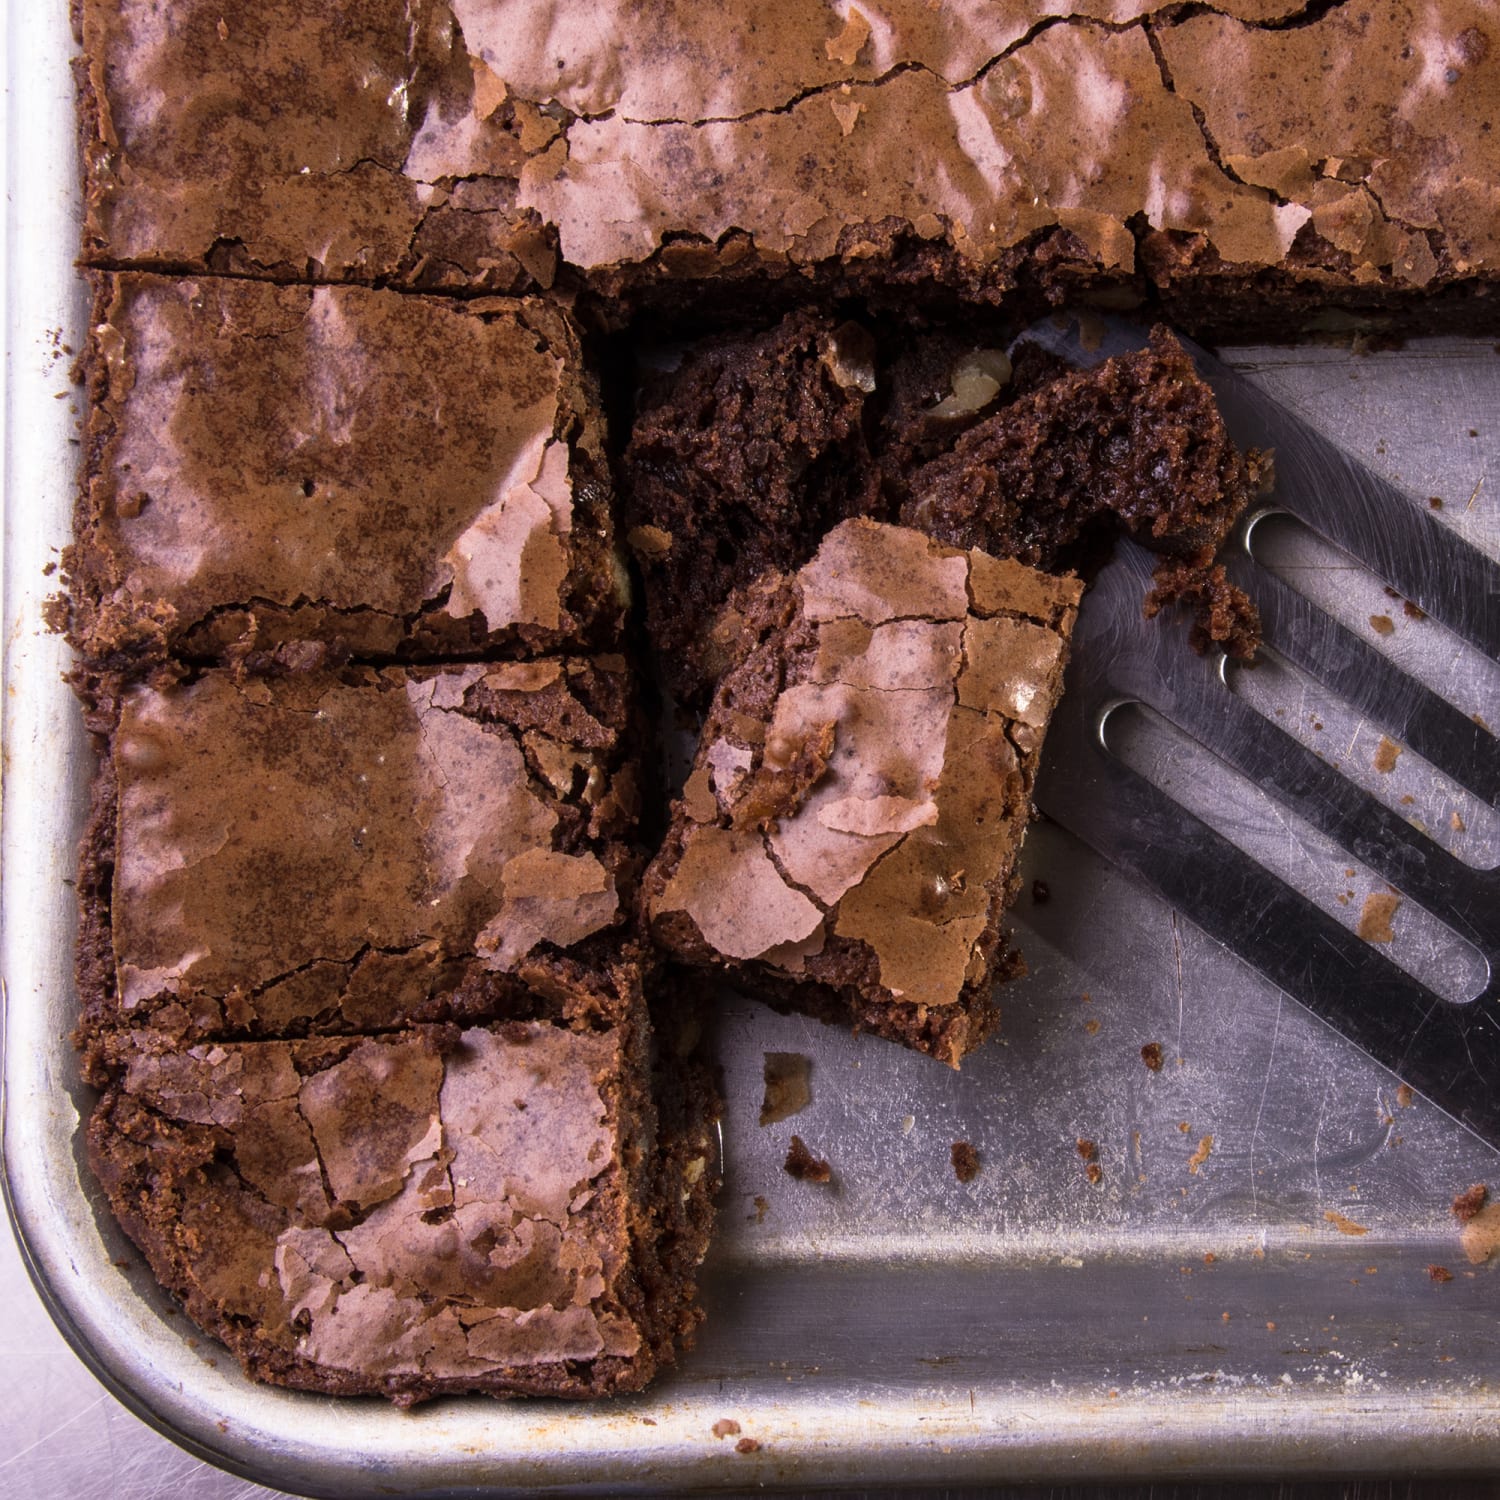 https://media-cldnry.s-nbcnews.com/image/upload/newscms/2018_48/1390851/best-kind-of-brownies-today-square-181129.jpg